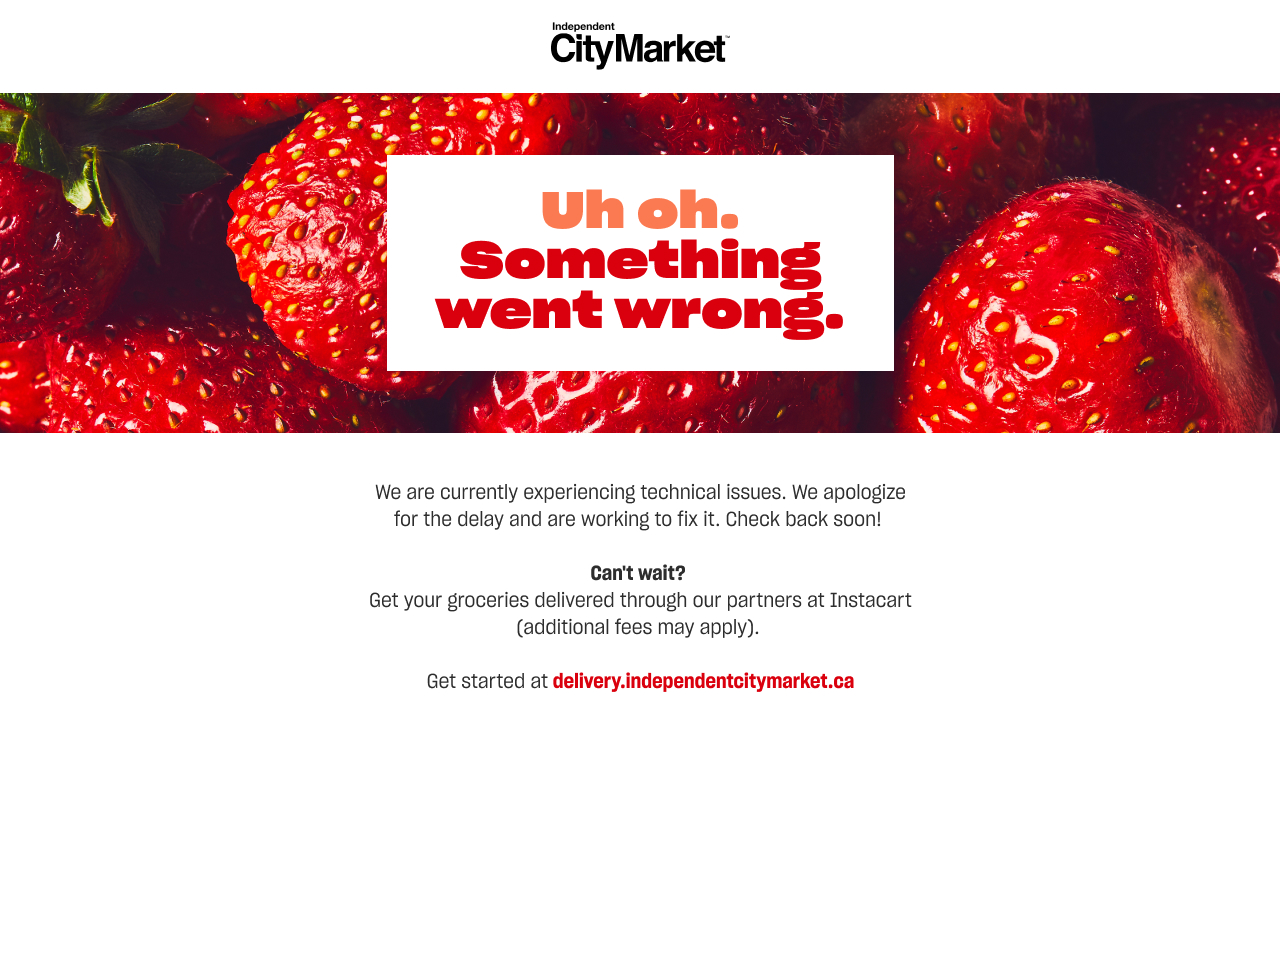 Uh oh. Something went wrong. We are currently experiencing technical issues due to an exceptional volume of traffic to our site. We apologize for the delay and are working to fix it. Looking for online grocery delivery? You can still order groceries online with our partners at Instacart. Get started at delivery.independentcitymarket.ca . Please note that Instacart deliver fees may vary.